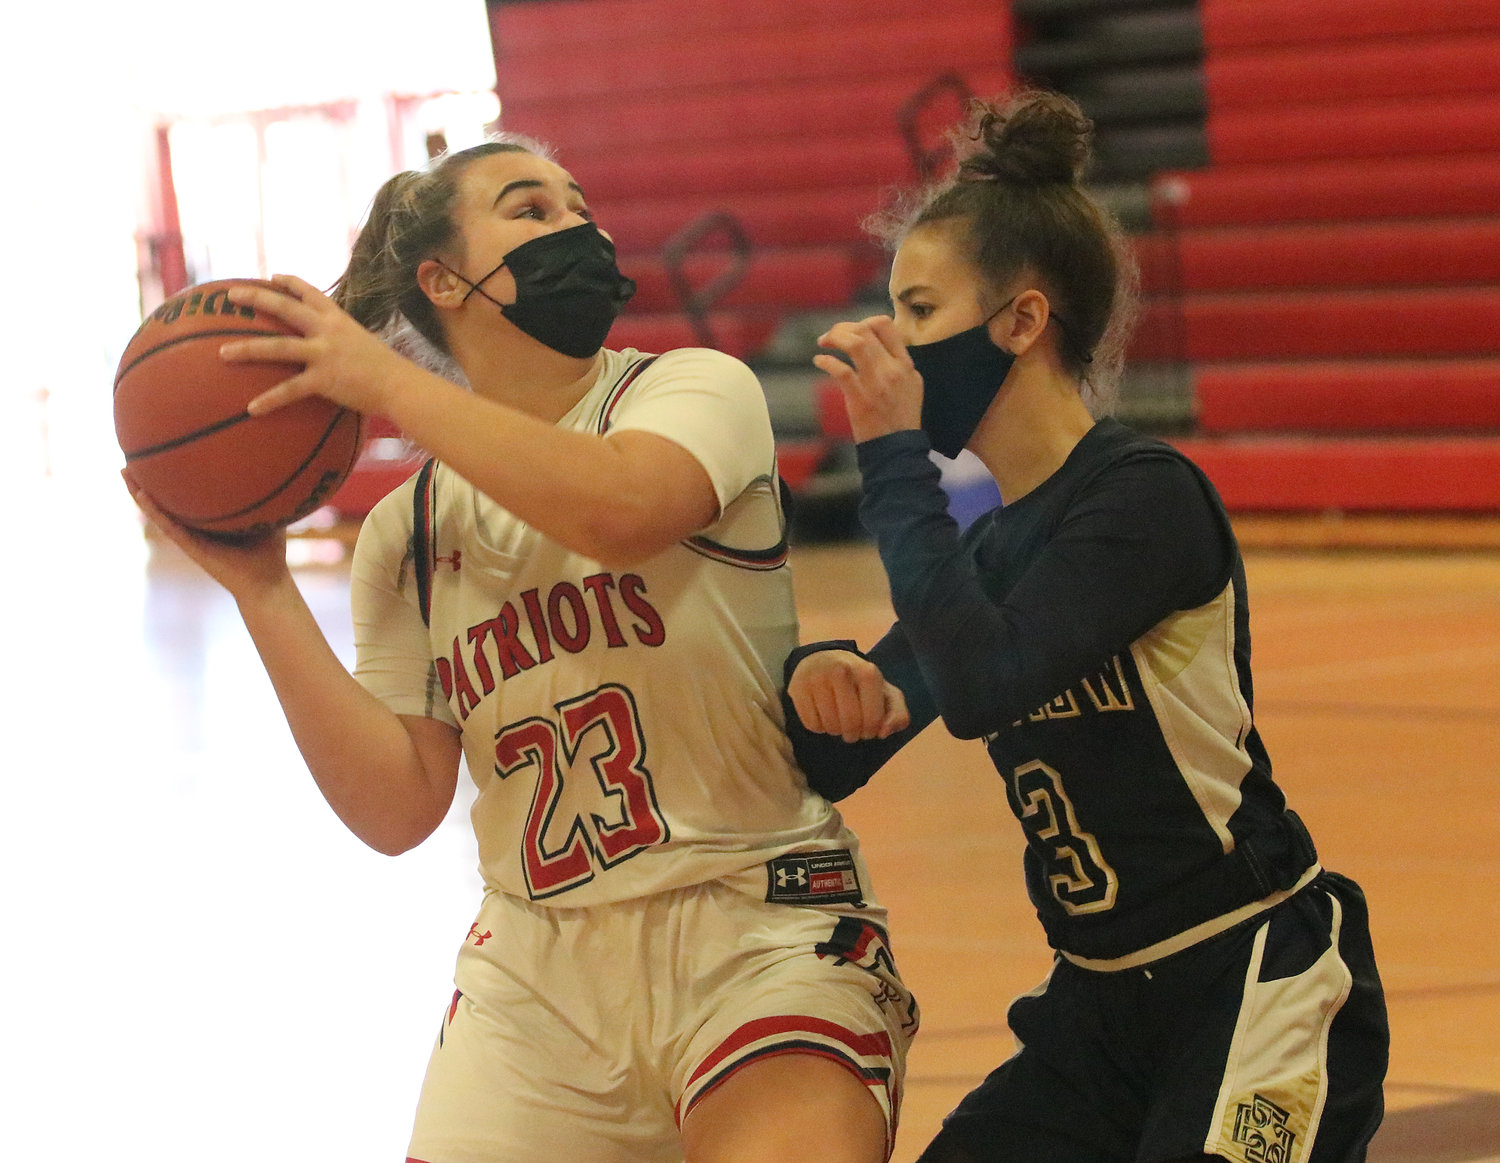 Patriots guard Emily Maiato is pressured by a Bay View defender while looking for an open shot.